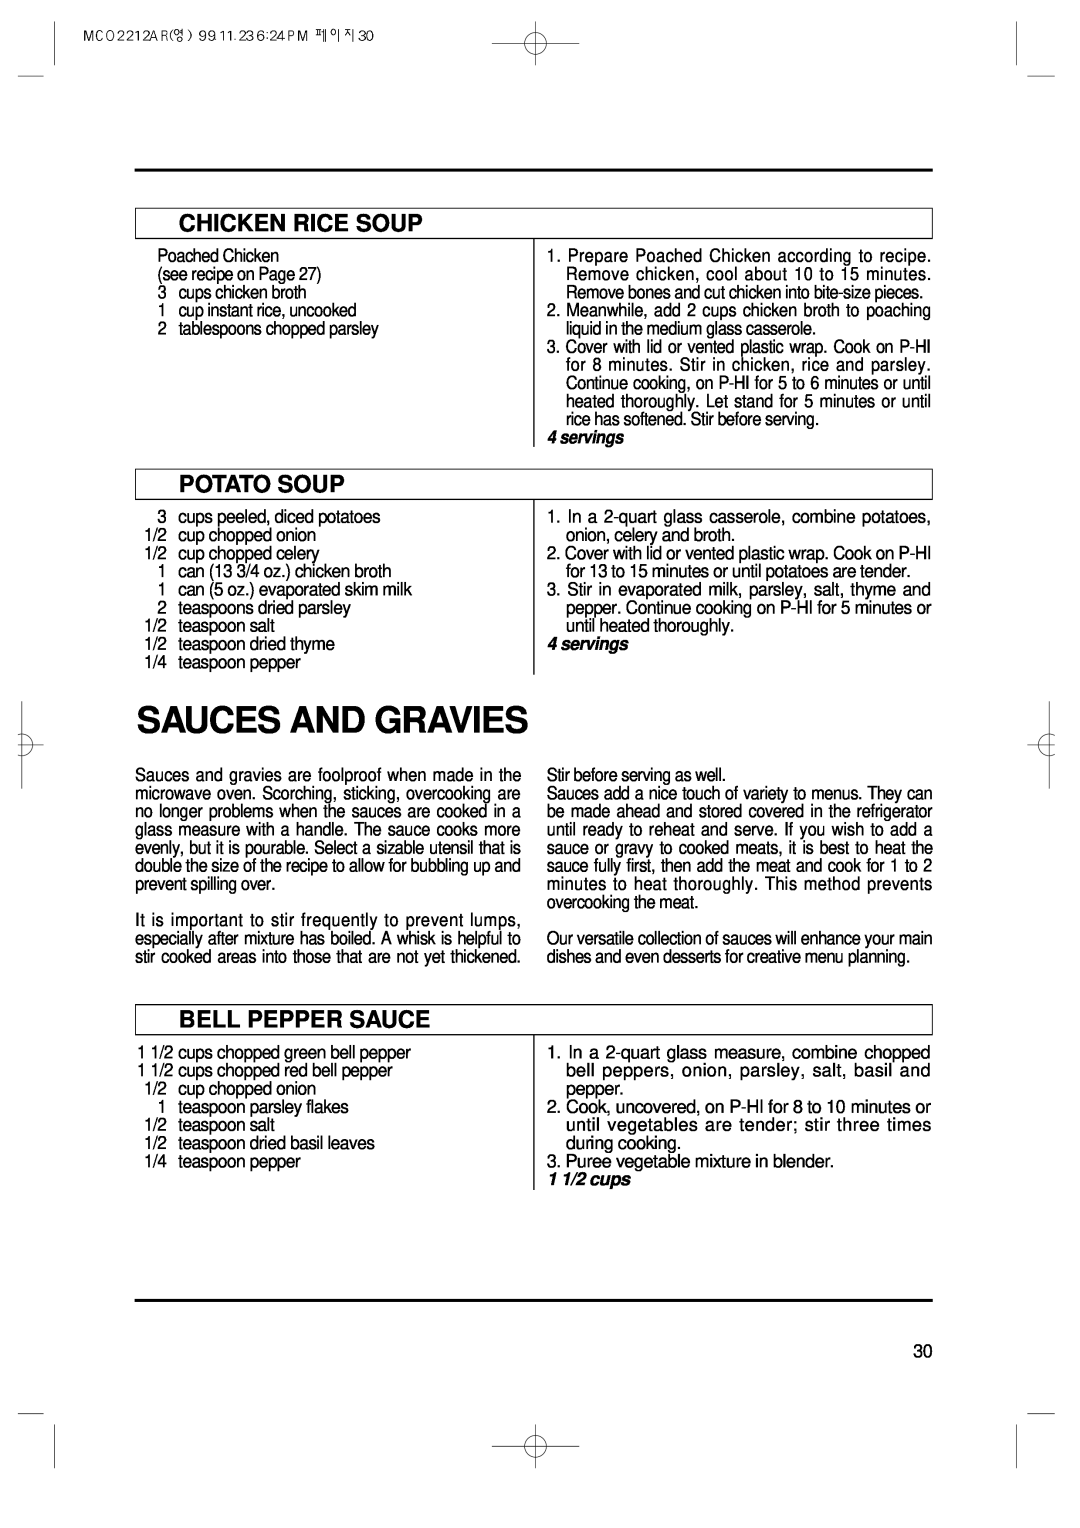 Magic Chef MCO2212AR manual Sauces And Gravies, Chicken Rice Soup, Potato Soup, Bell Pepper Sauce, 1 1/2 cups, servings 